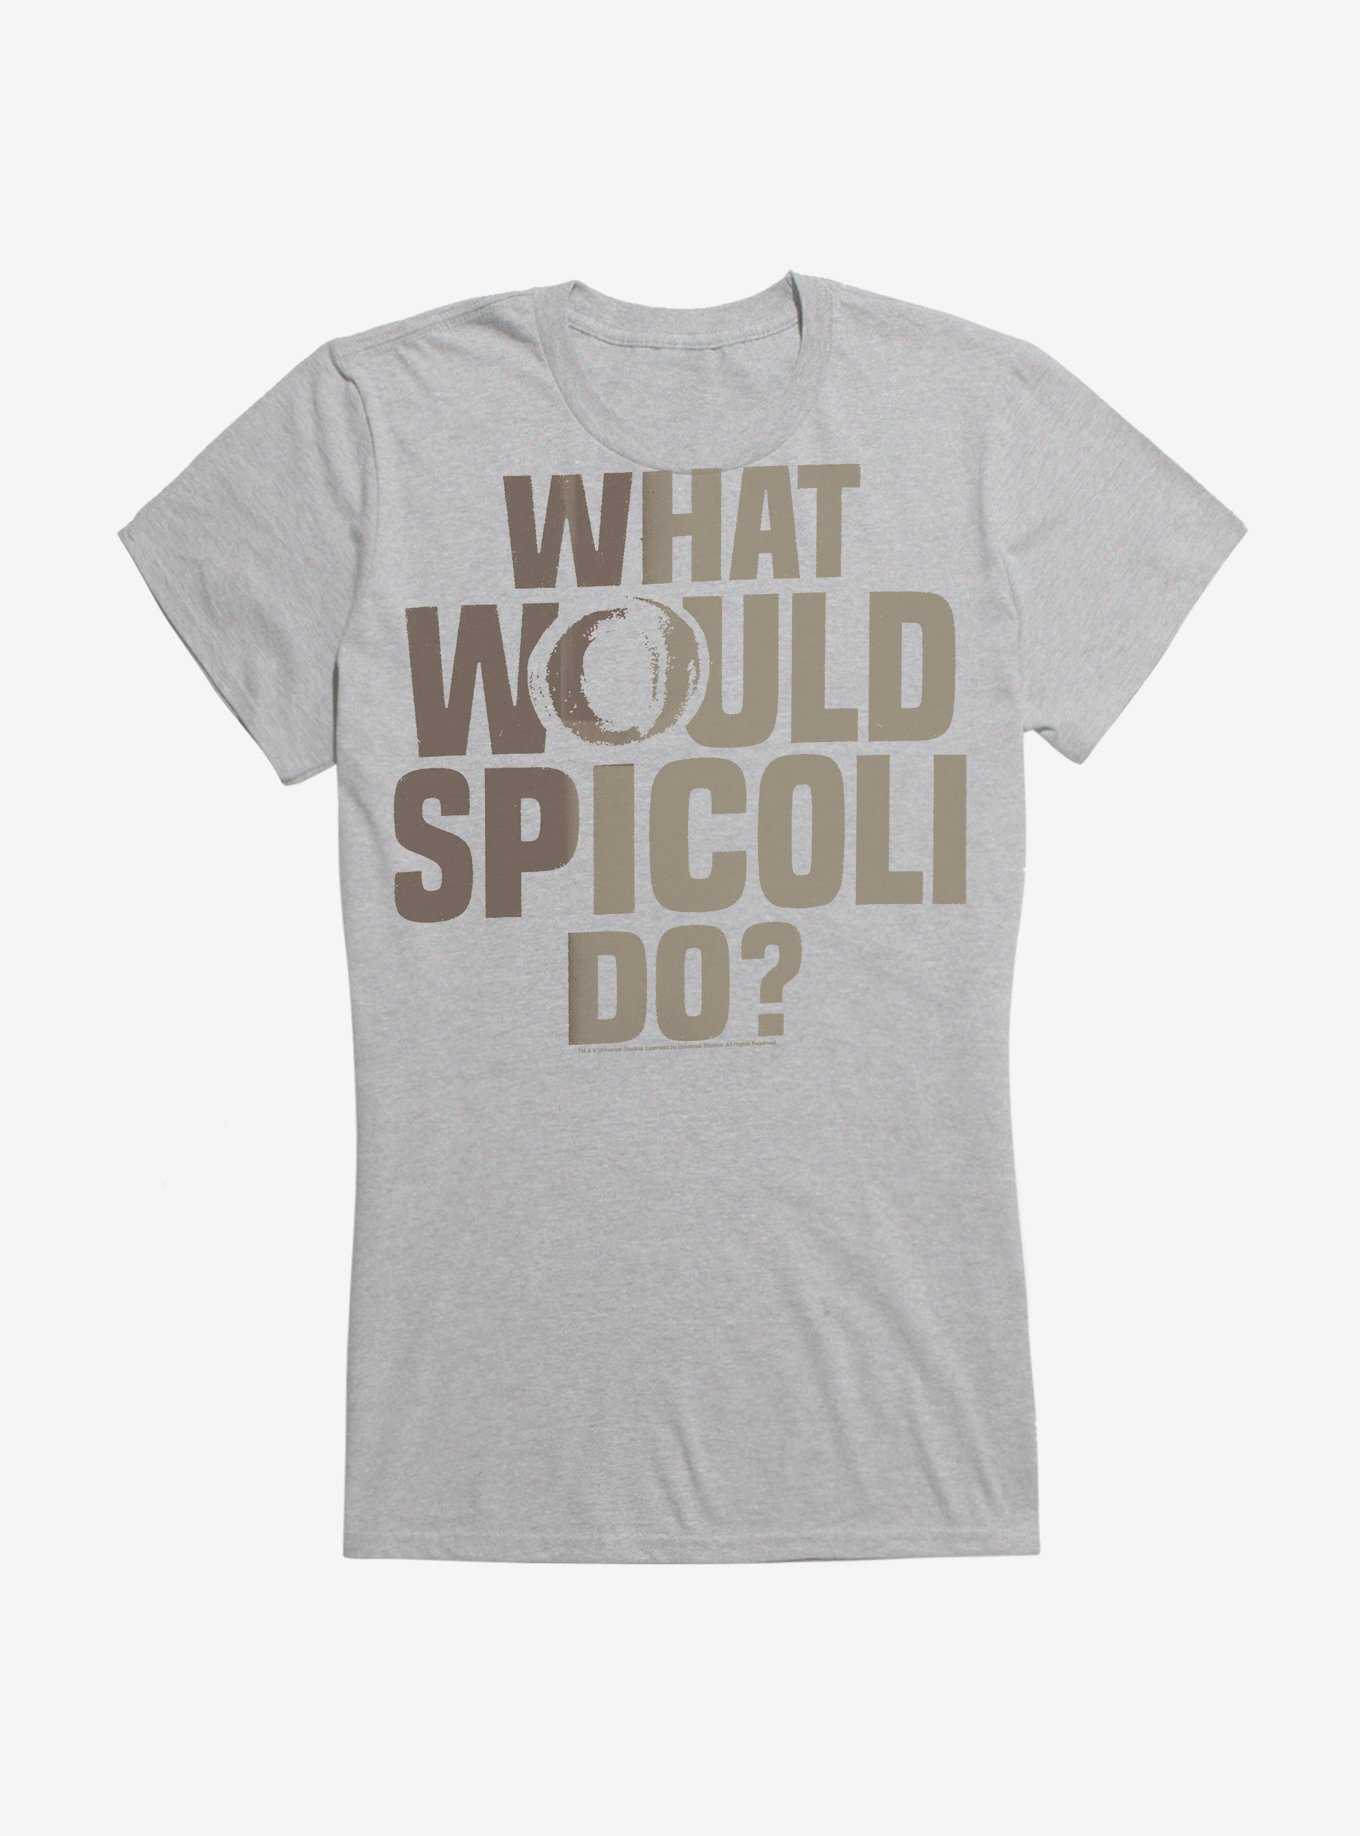 Fast Times At Ridgemont High What Would Spicoli Do? Girls T-Shirt, , hi-res